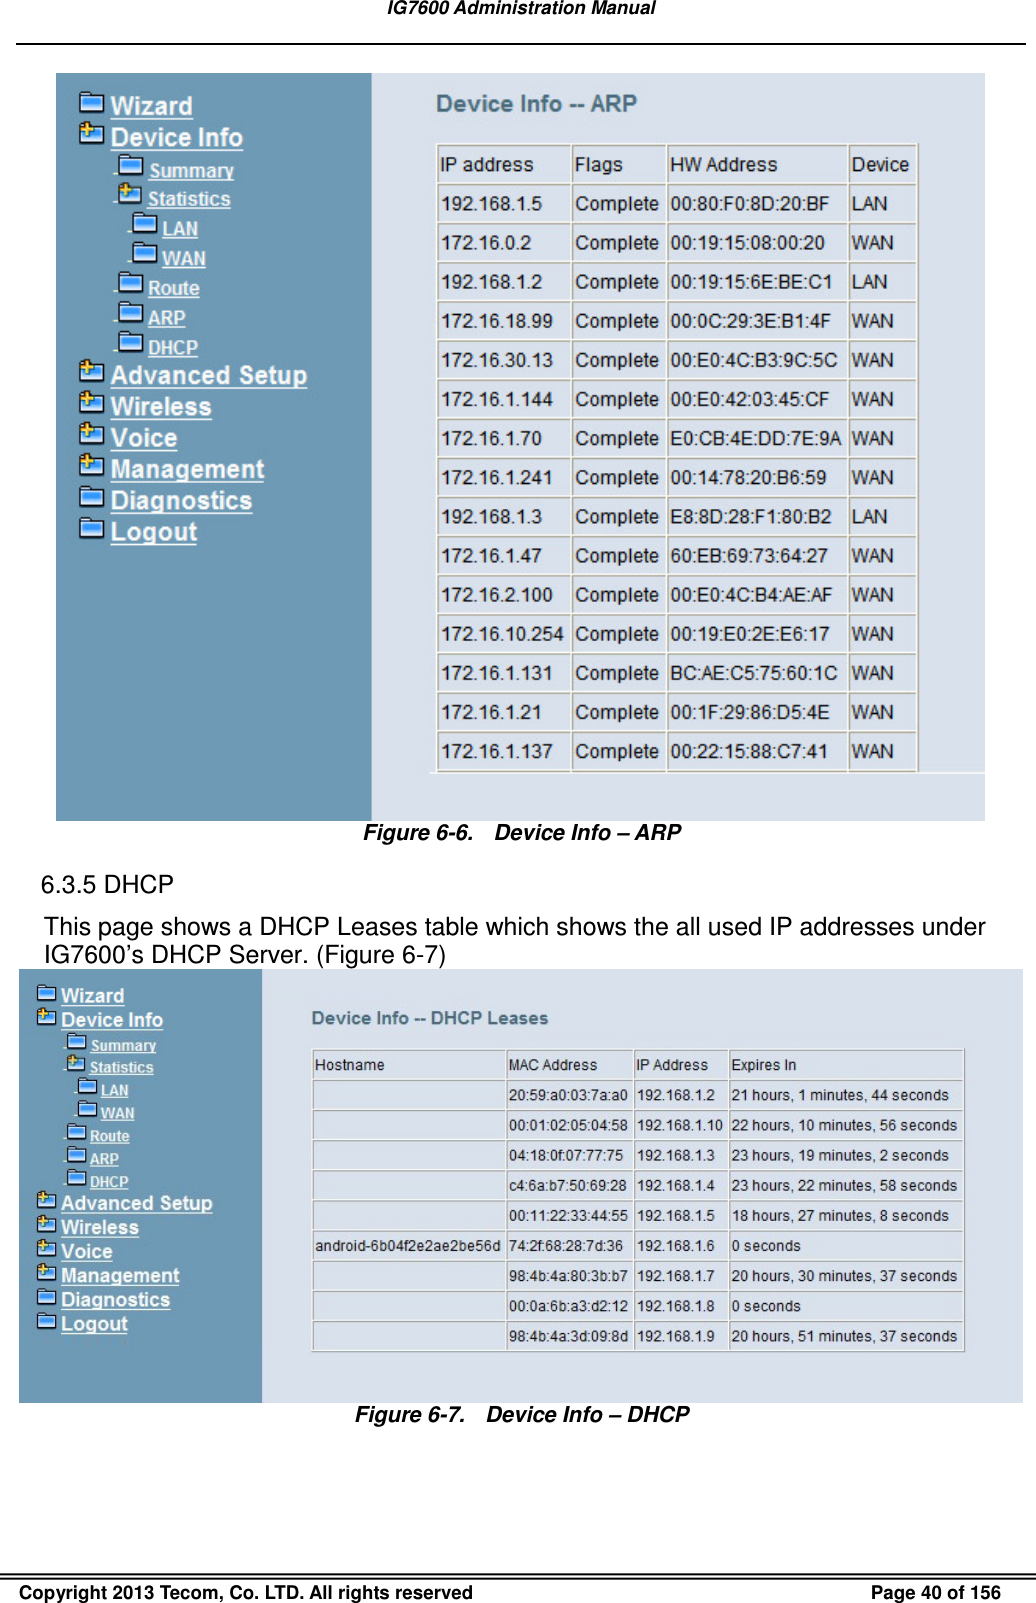 IG7600 Administration Manual  Copyright 2013 Tecom, Co. LTD. All rights reserved  Page 40 of 156  Figure 6-6.  Device Info – ARP 6.3.5 DHCP This page shows a DHCP Leases table which shows the all used IP addresses under IG7600’s DHCP Server. (Figure 6-7)  Figure 6-7.  Device Info – DHCP 